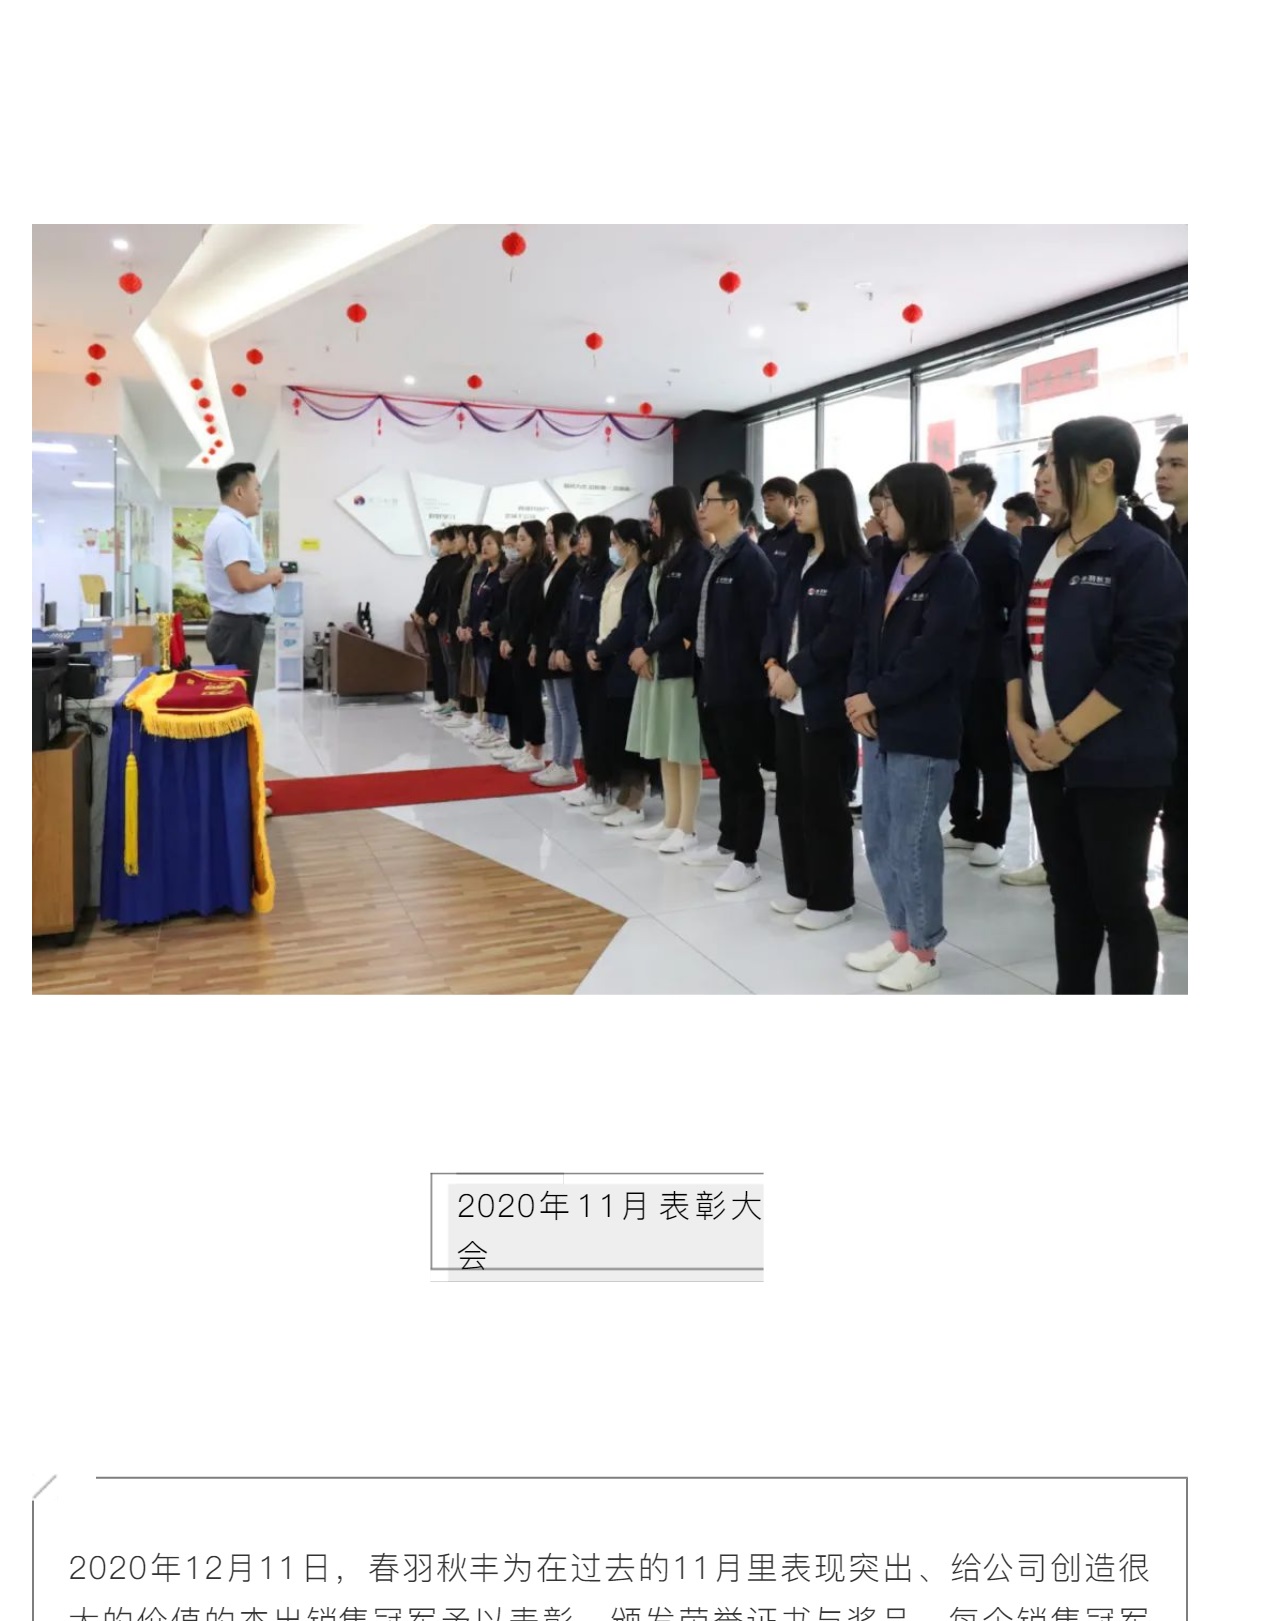 The 24th DPES Advertising Exhibition Chunyu Qiufeng is looking forward to your visit in Hall C26